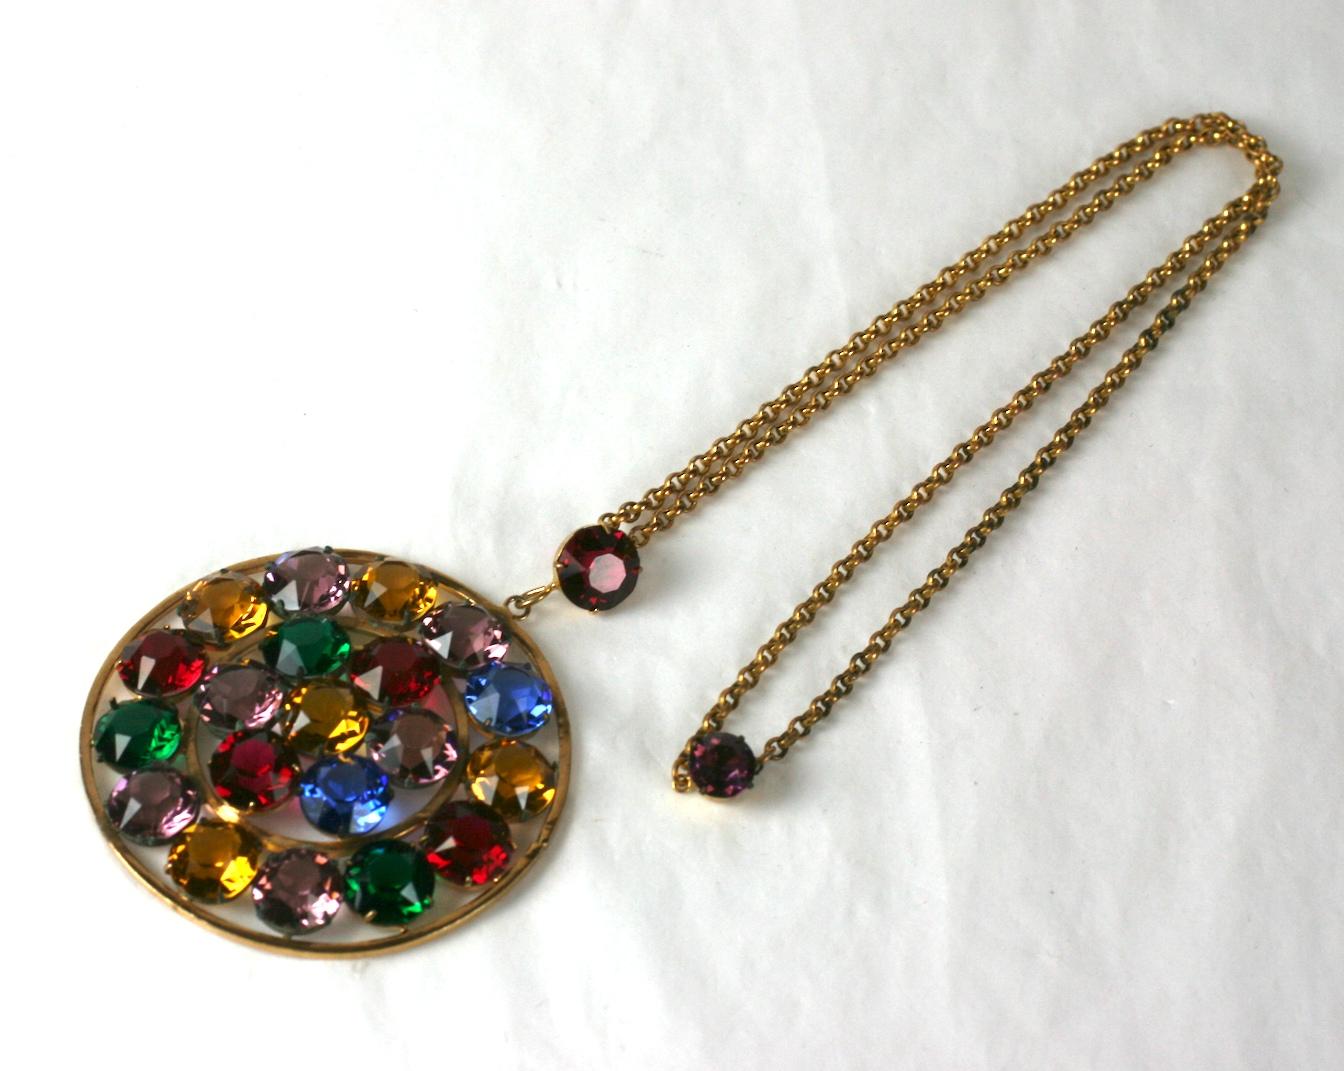 Large Czechoslovakian Art Deco pendant necklace of faux gem stone colored glass crystals. Prong set round pendant and bale in gilt metal with rolo chain.
Excellent Condition. 
Length 21